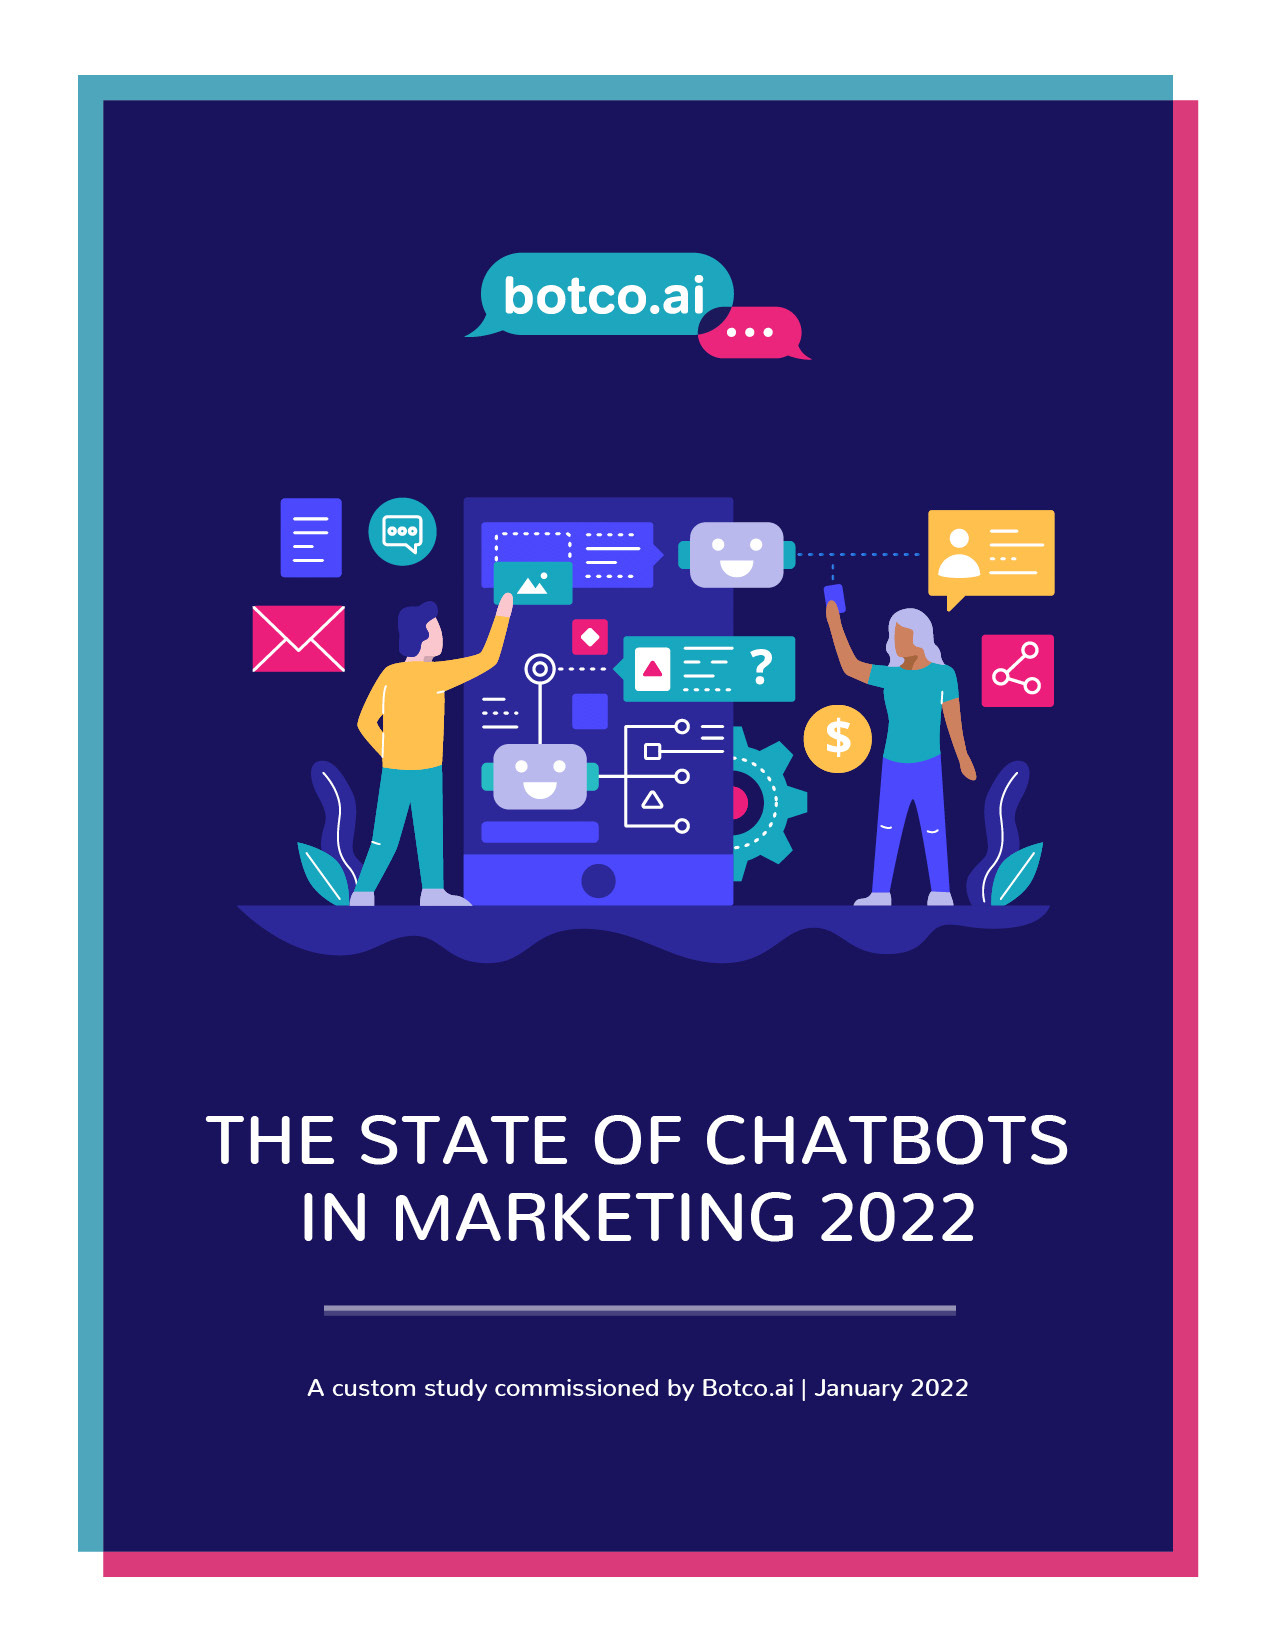 The State of Chatbots in Marketing